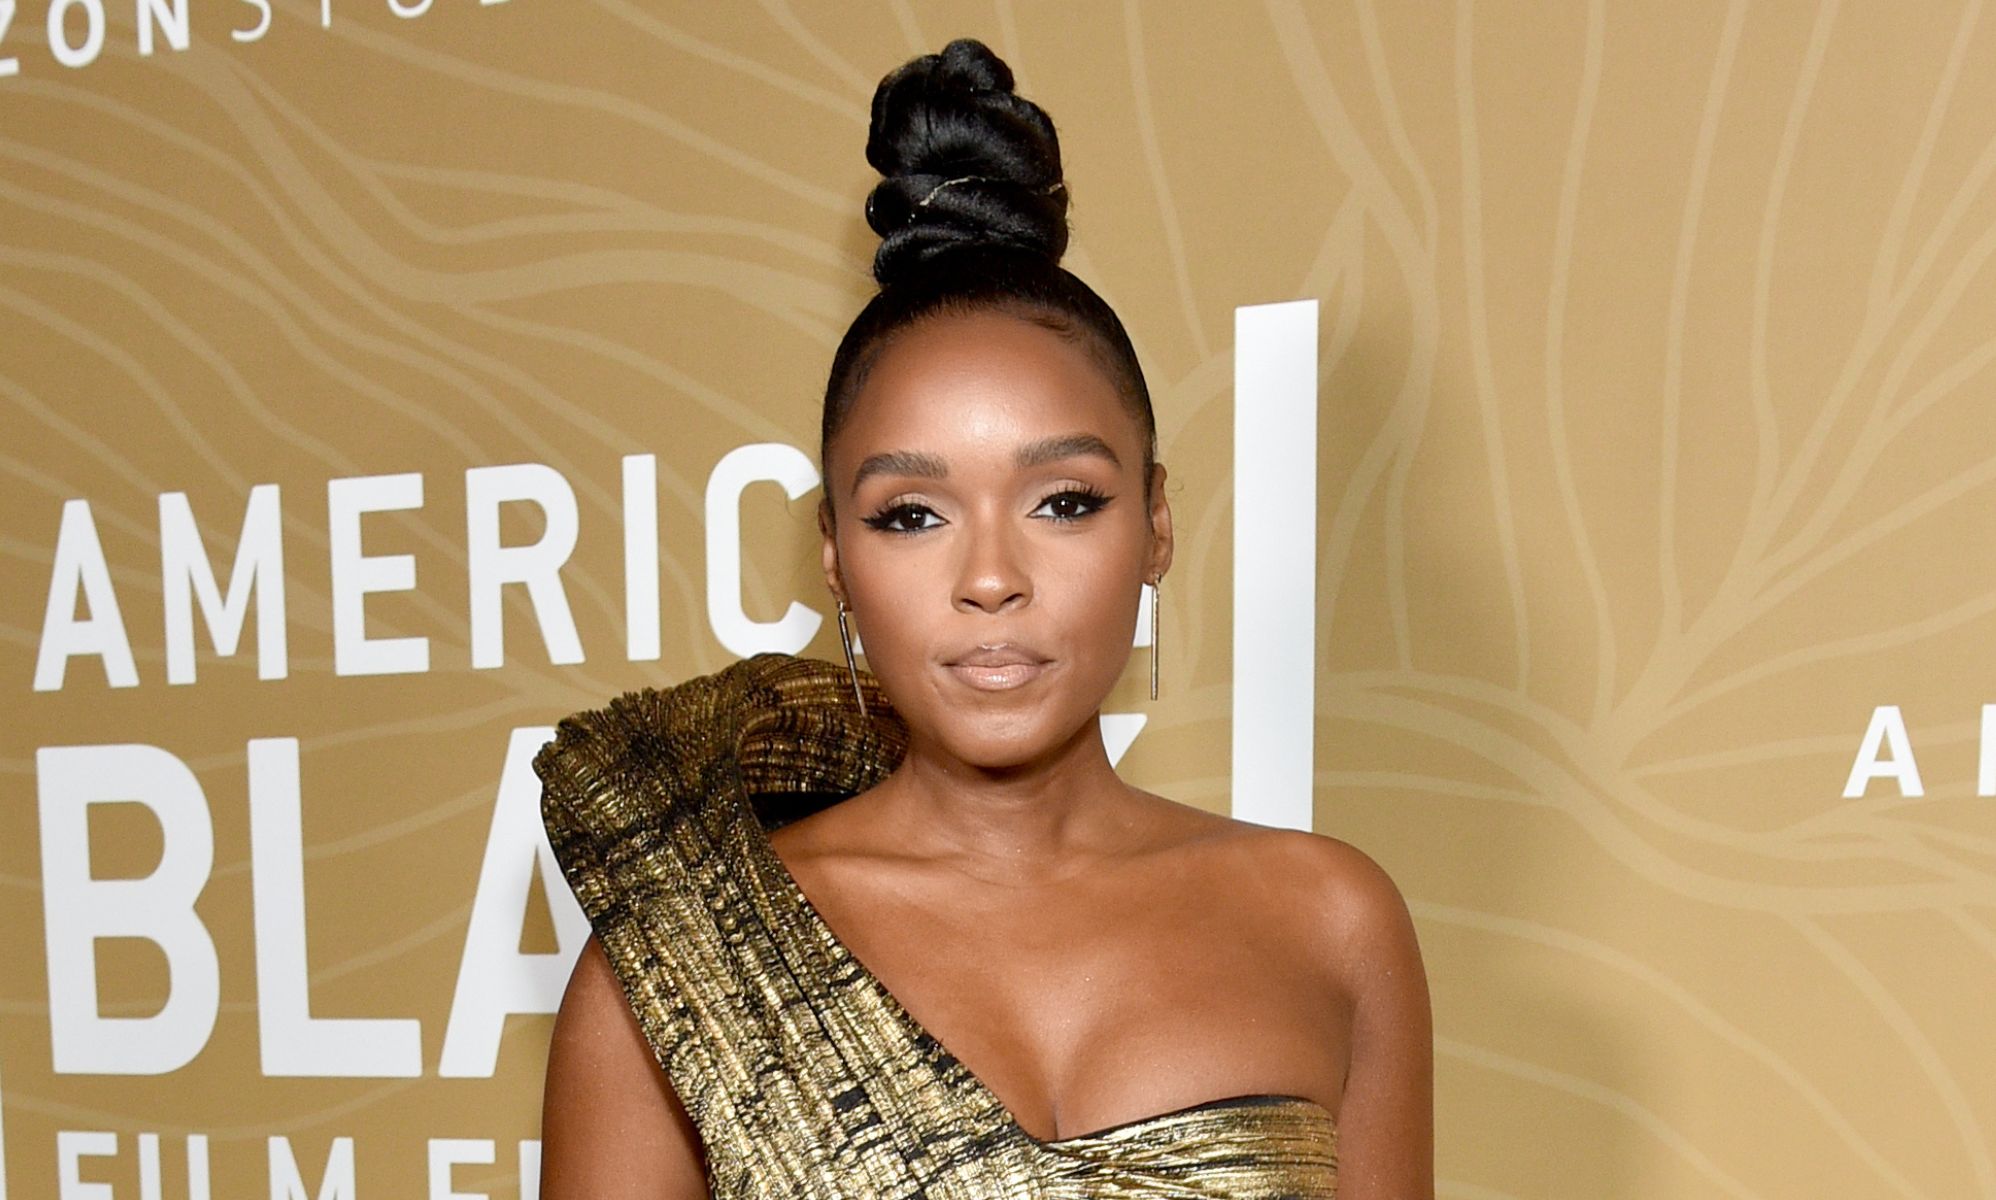 Janelle Monáe Wants You To Open Your Mind About Gender Identity